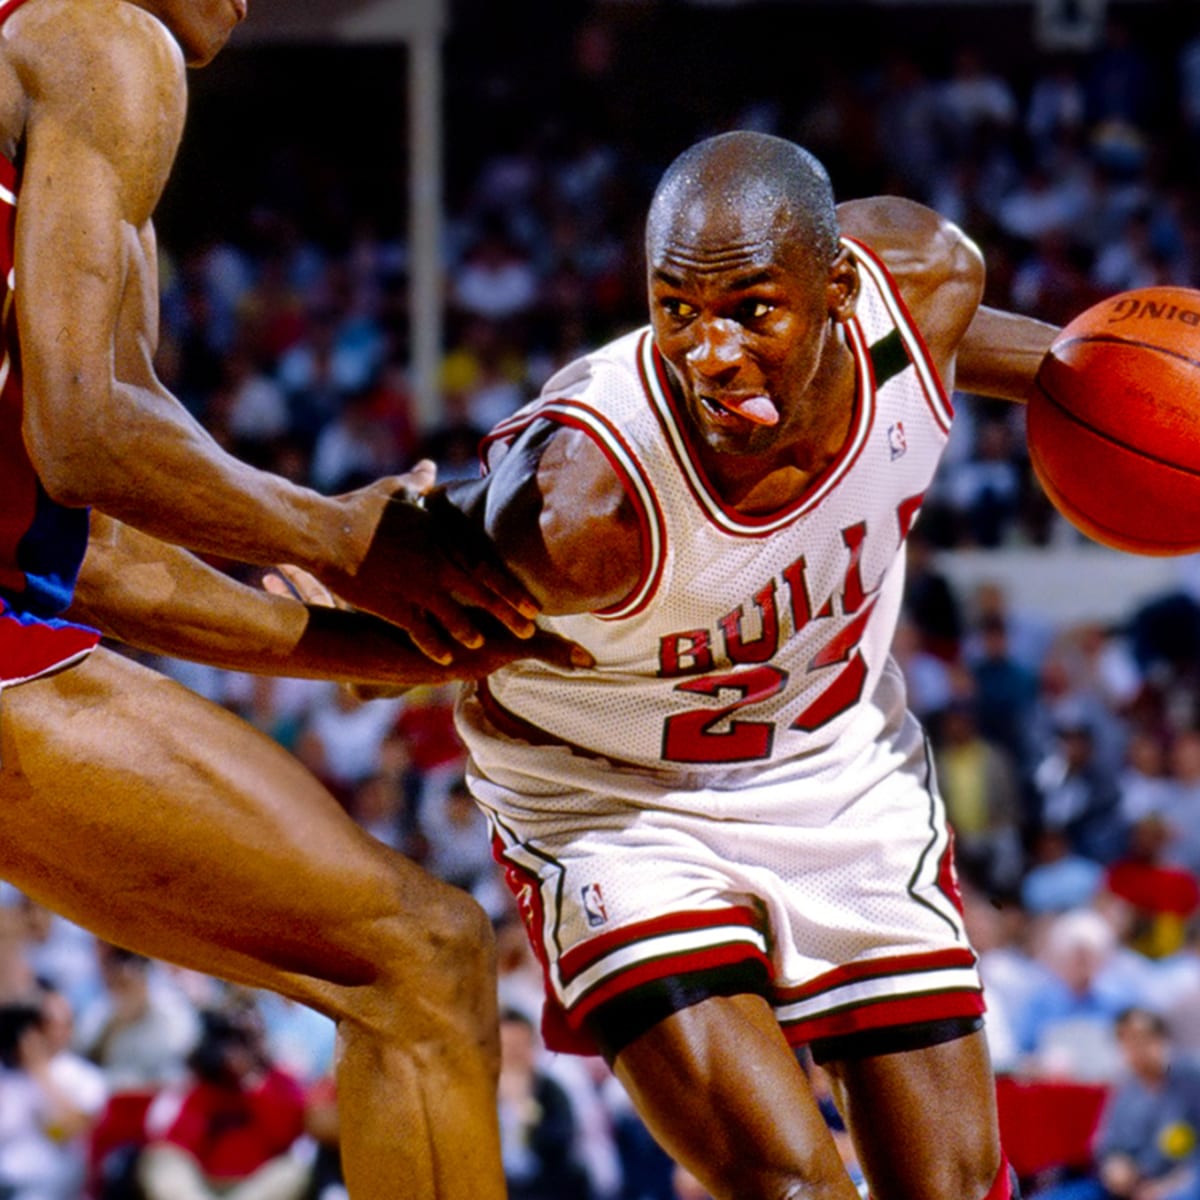 Who are the greatest Bulls players of all-time?